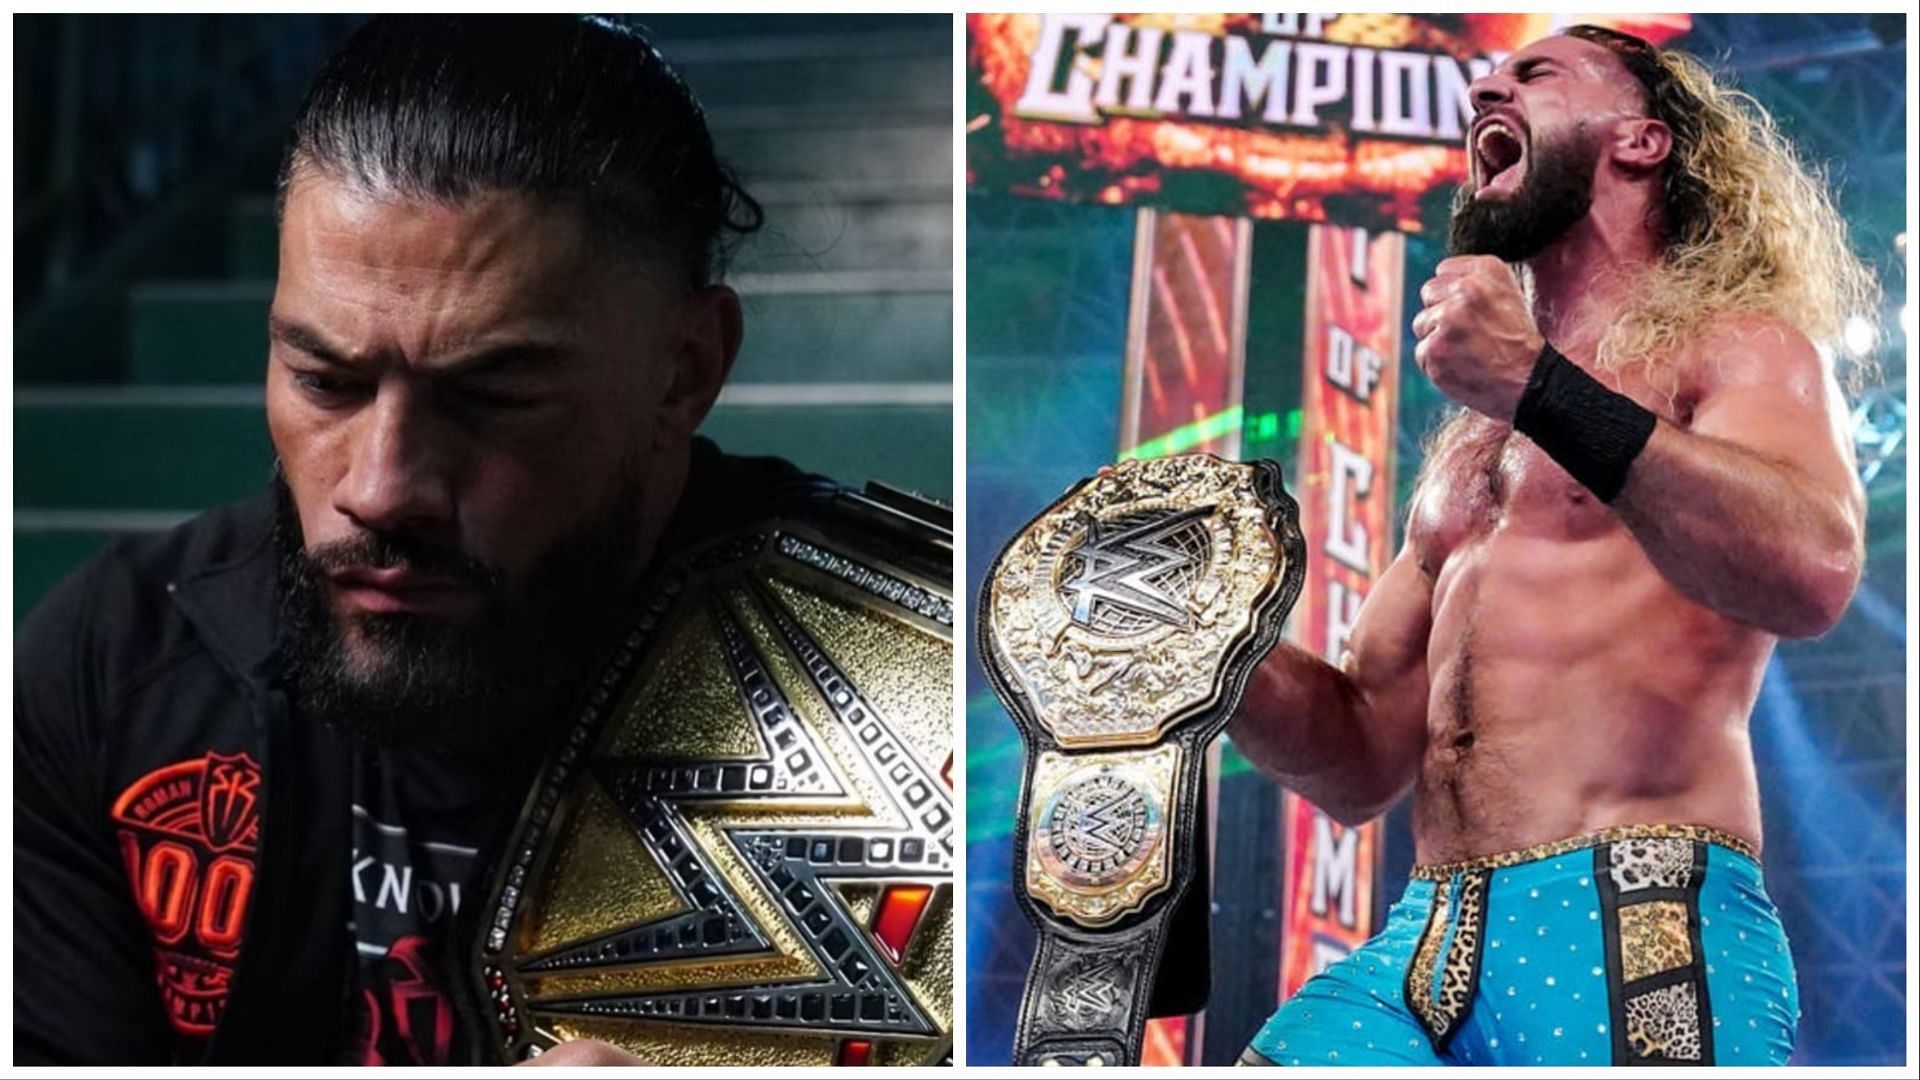 Roman Reigns with the golden Undisputed WWE Universal Championship (Left) and Seth Rollins as World Heavyweight Champion (Right)